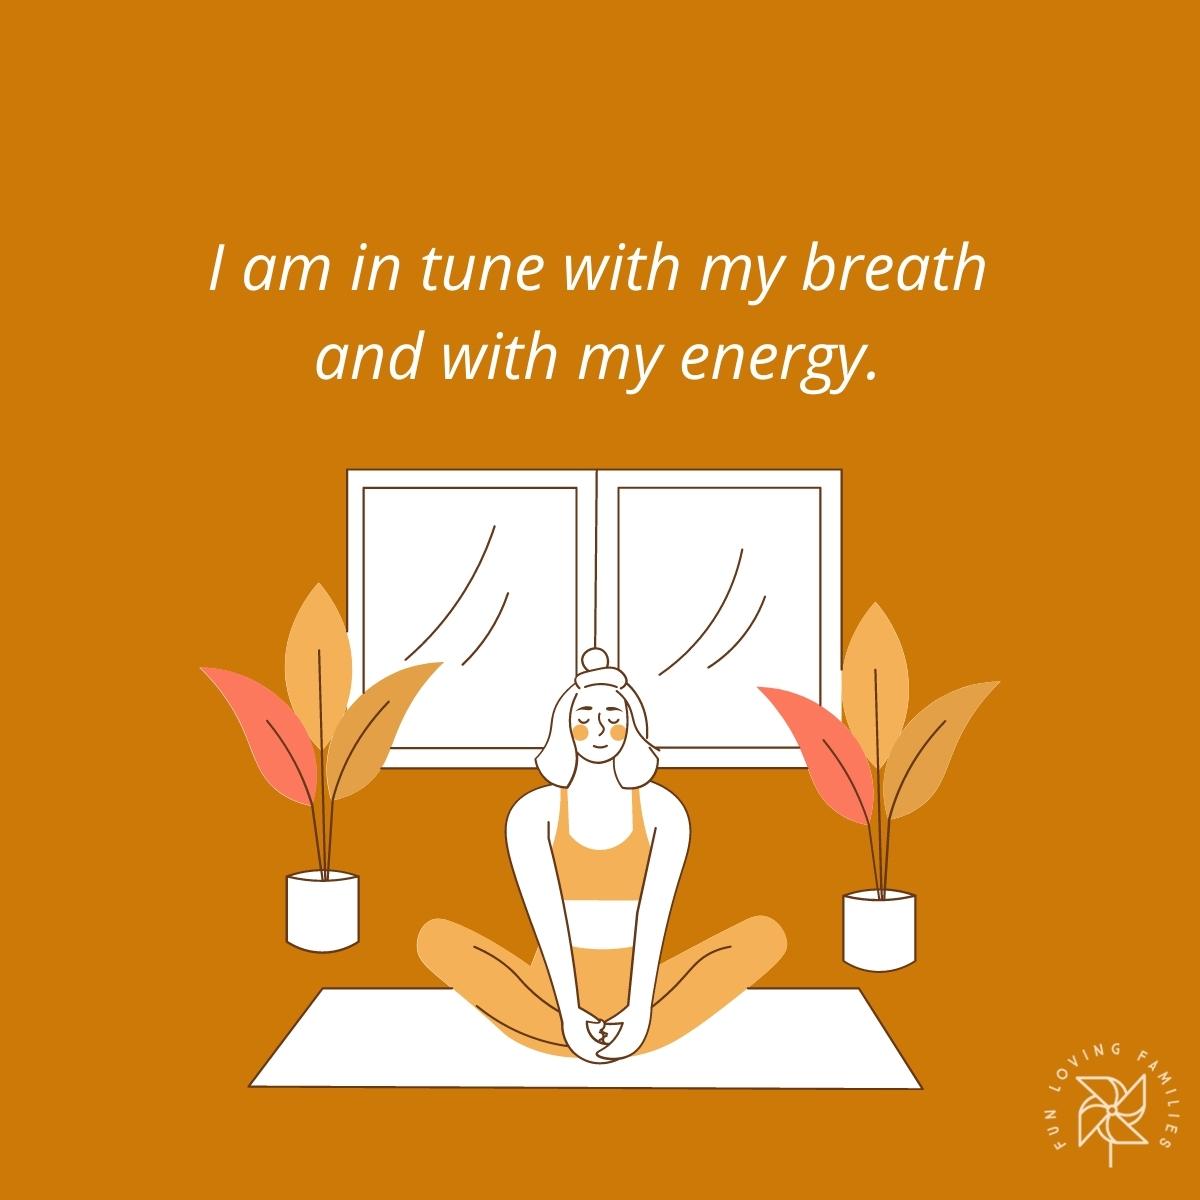 I am in tune with my breath and with my energy affirmation image